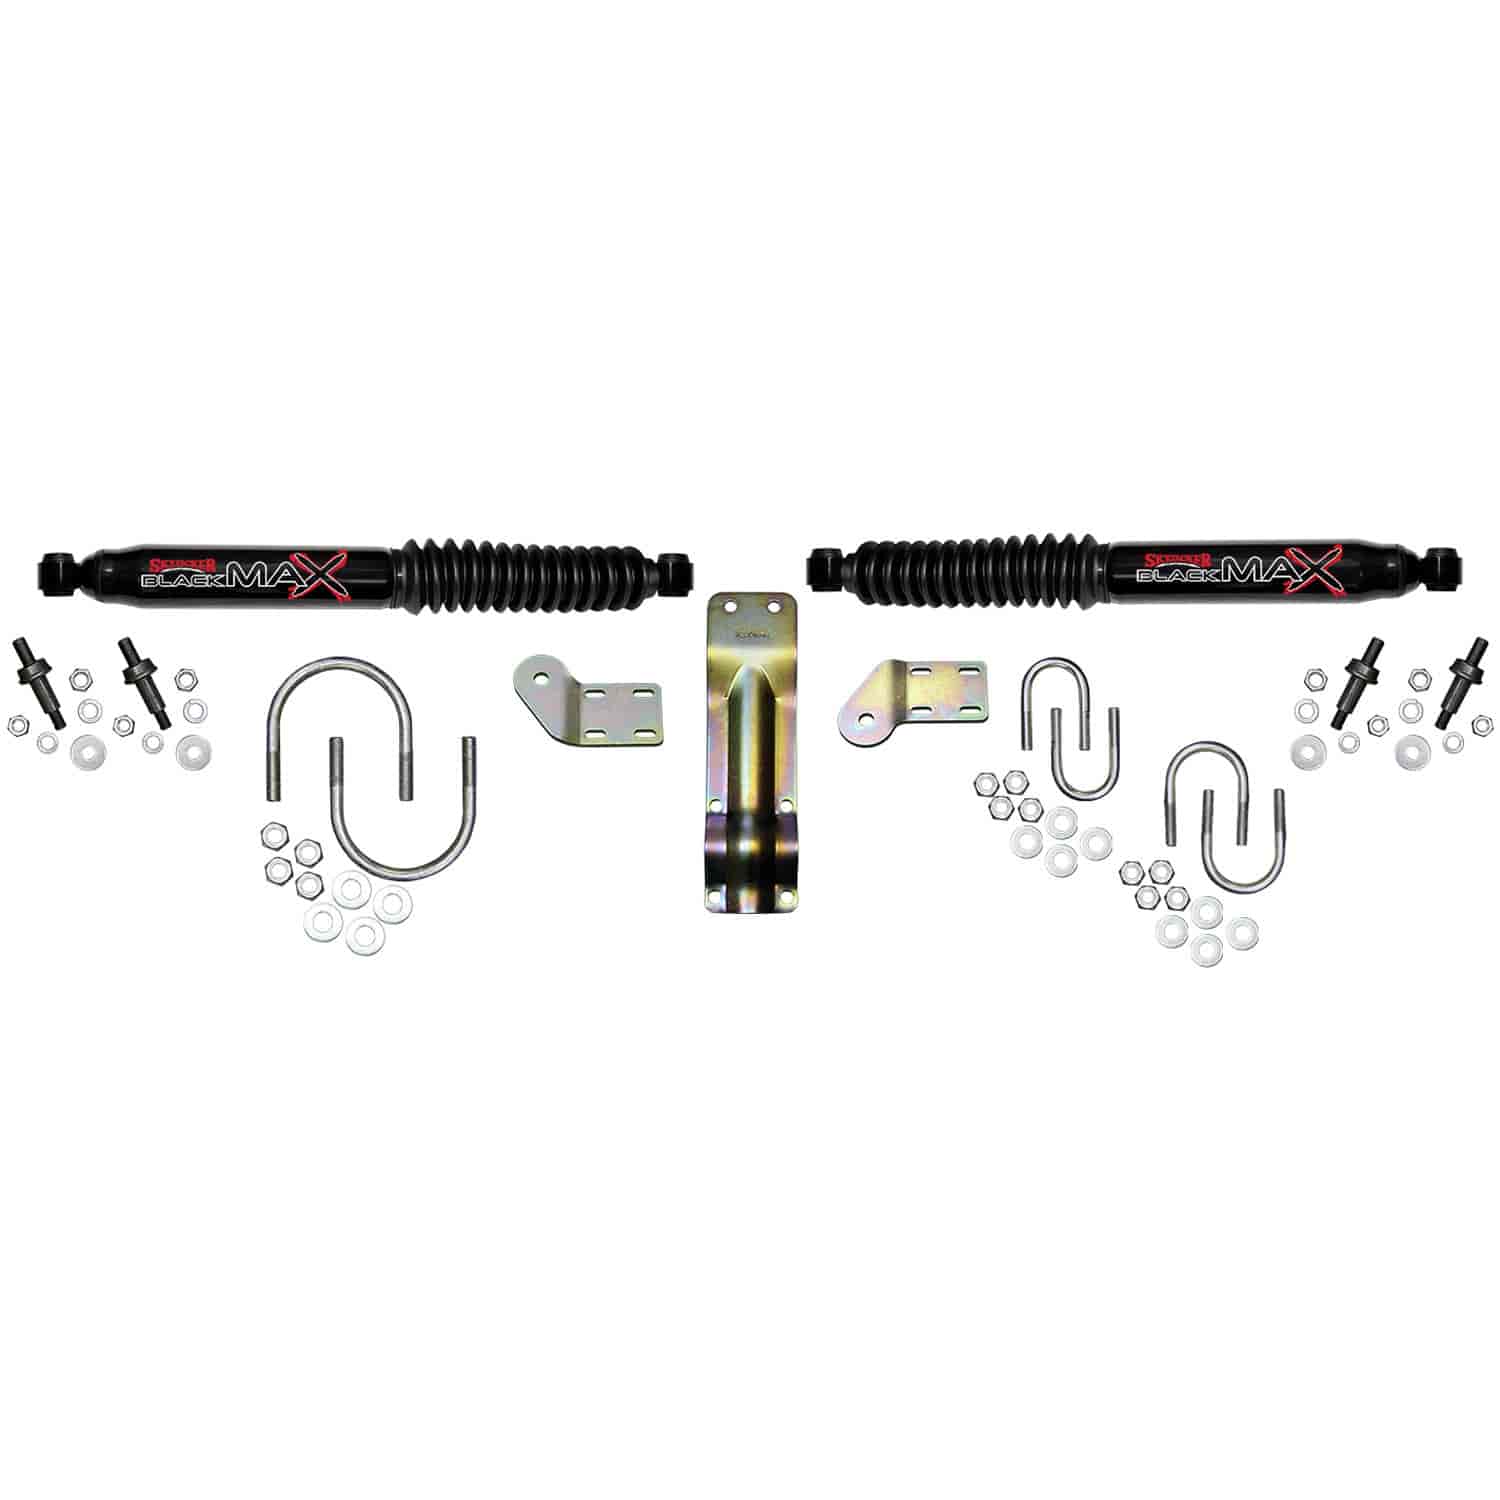 Dual Black MAX Stabilizer 1998-2001 for Dodge Ram 1/2, 1998-2002 for 3/4, 1 Ton 4WD with/without Drop Pitman Arm